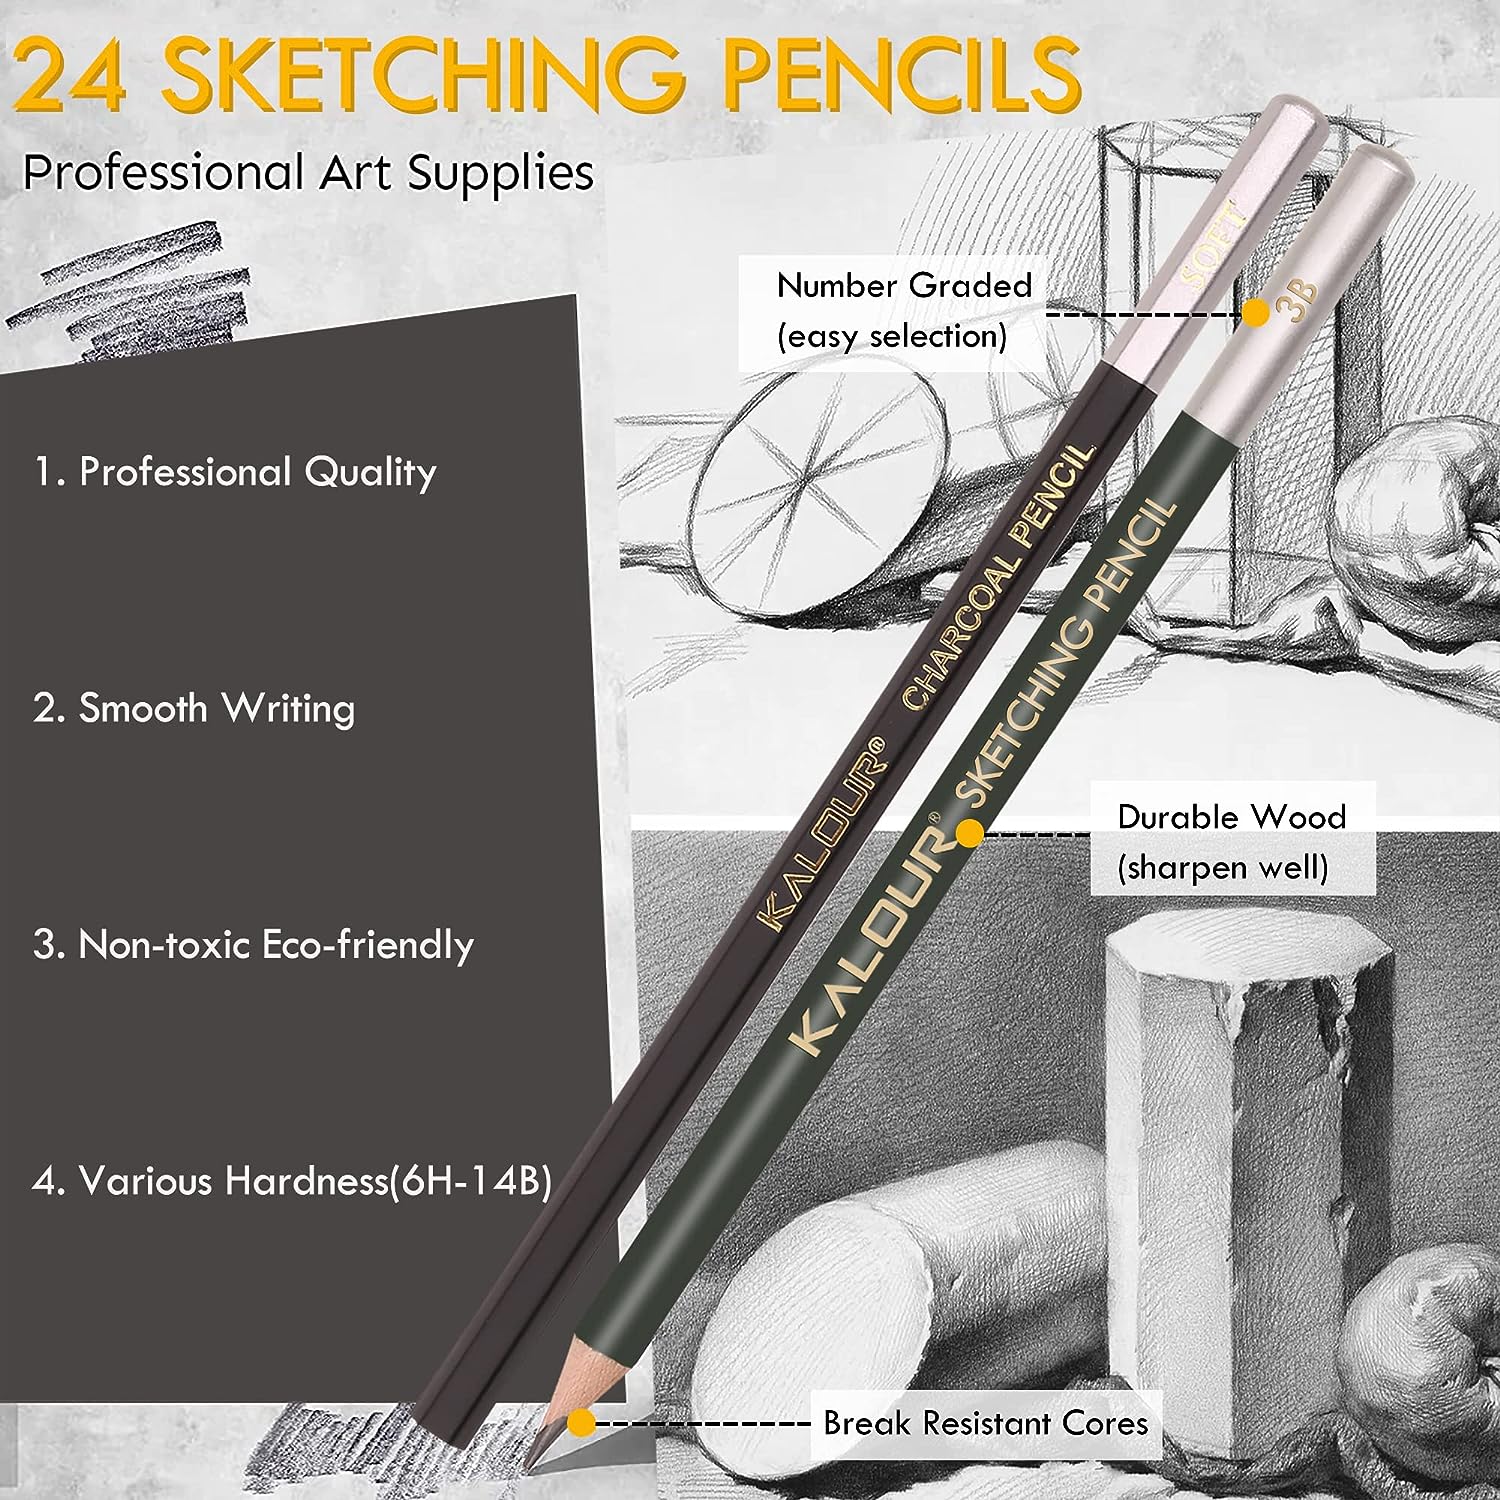 52-Piece Drawing Set with Pencils, Charcoals, Pastels - Includes 2 Drawing  Pads, Sharpener, Art Supplies in Tin Box